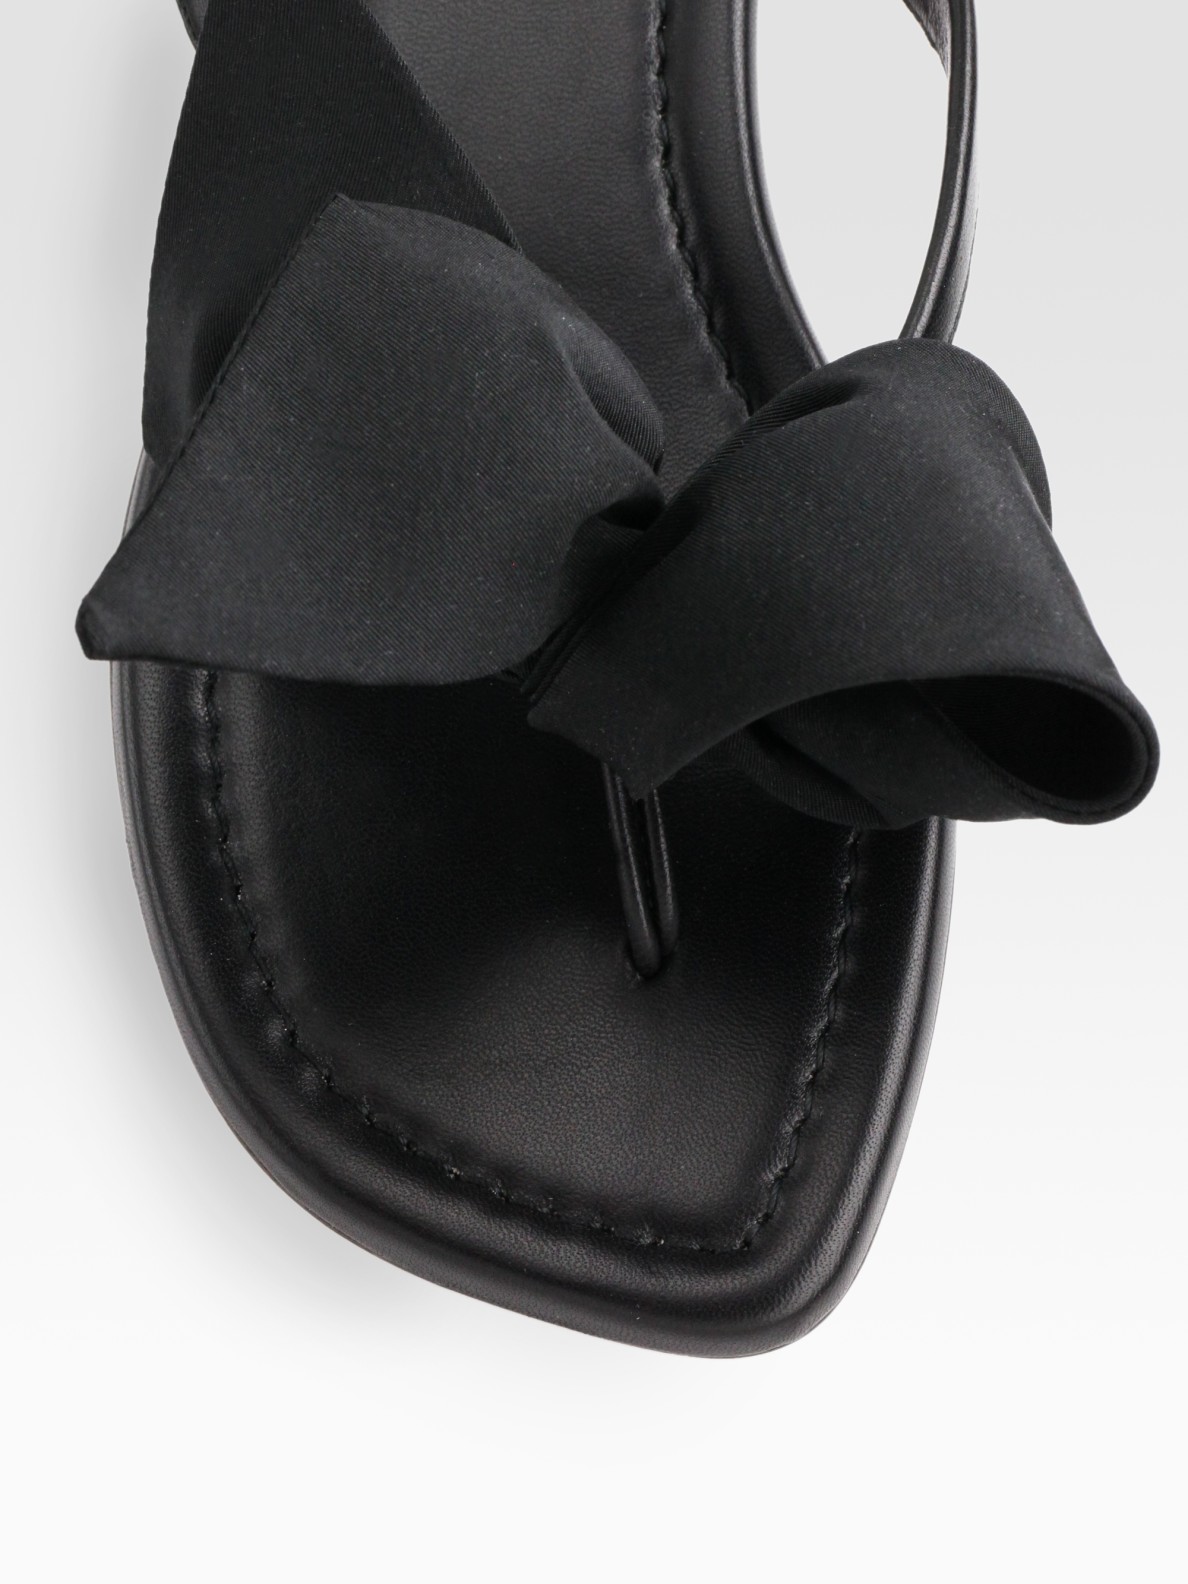 Christian louboutin Leather \u0026amp; Nylon Bow Thong Sandals in Black | Lyst